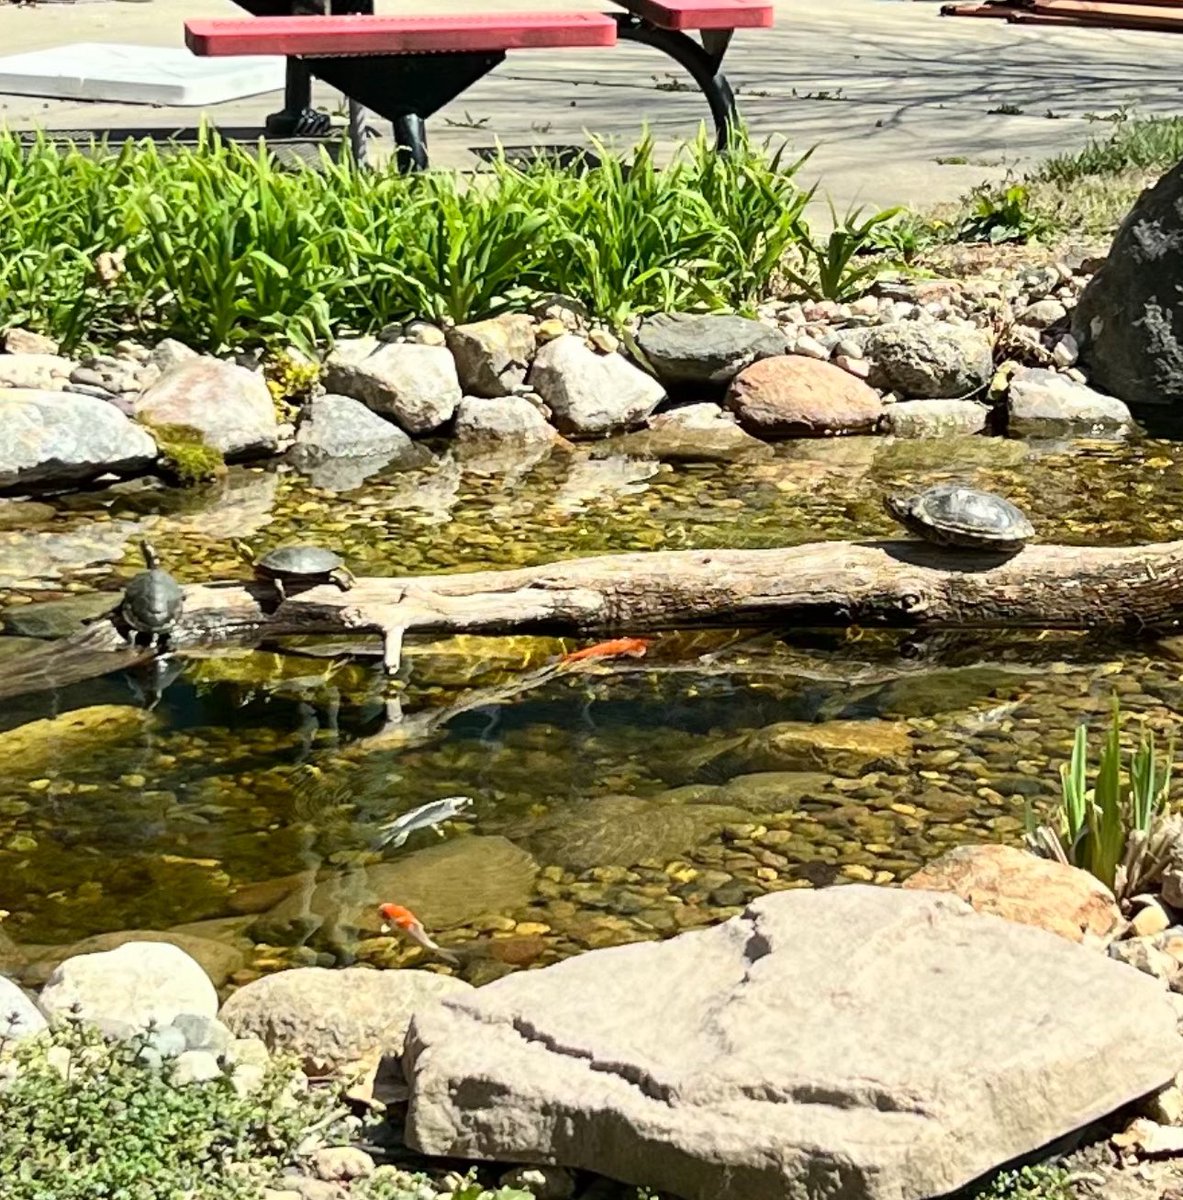 All THREE of our pond turtles 🐢enjoyed time in the 🌞 sun today — signs of Spring at KSTM!!! #KSTMproud #OPSProud